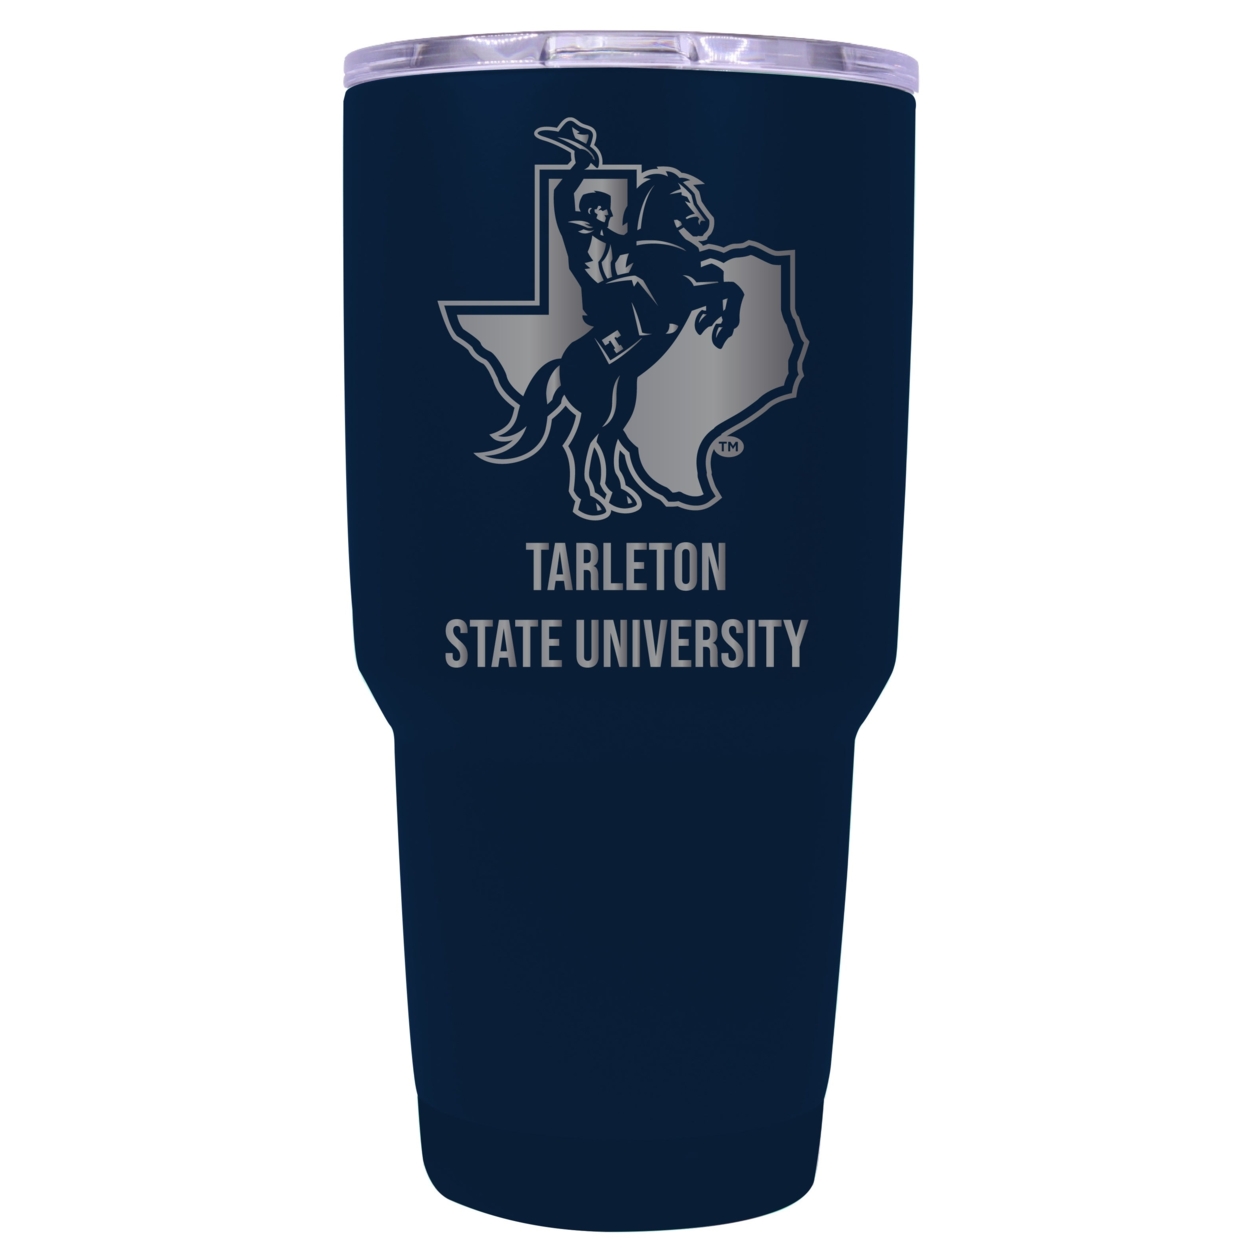 Tarleton State University 24 Oz Laser Engraved Stainless Steel Insulated Tumbler - Choose Your Color. - Seafoam